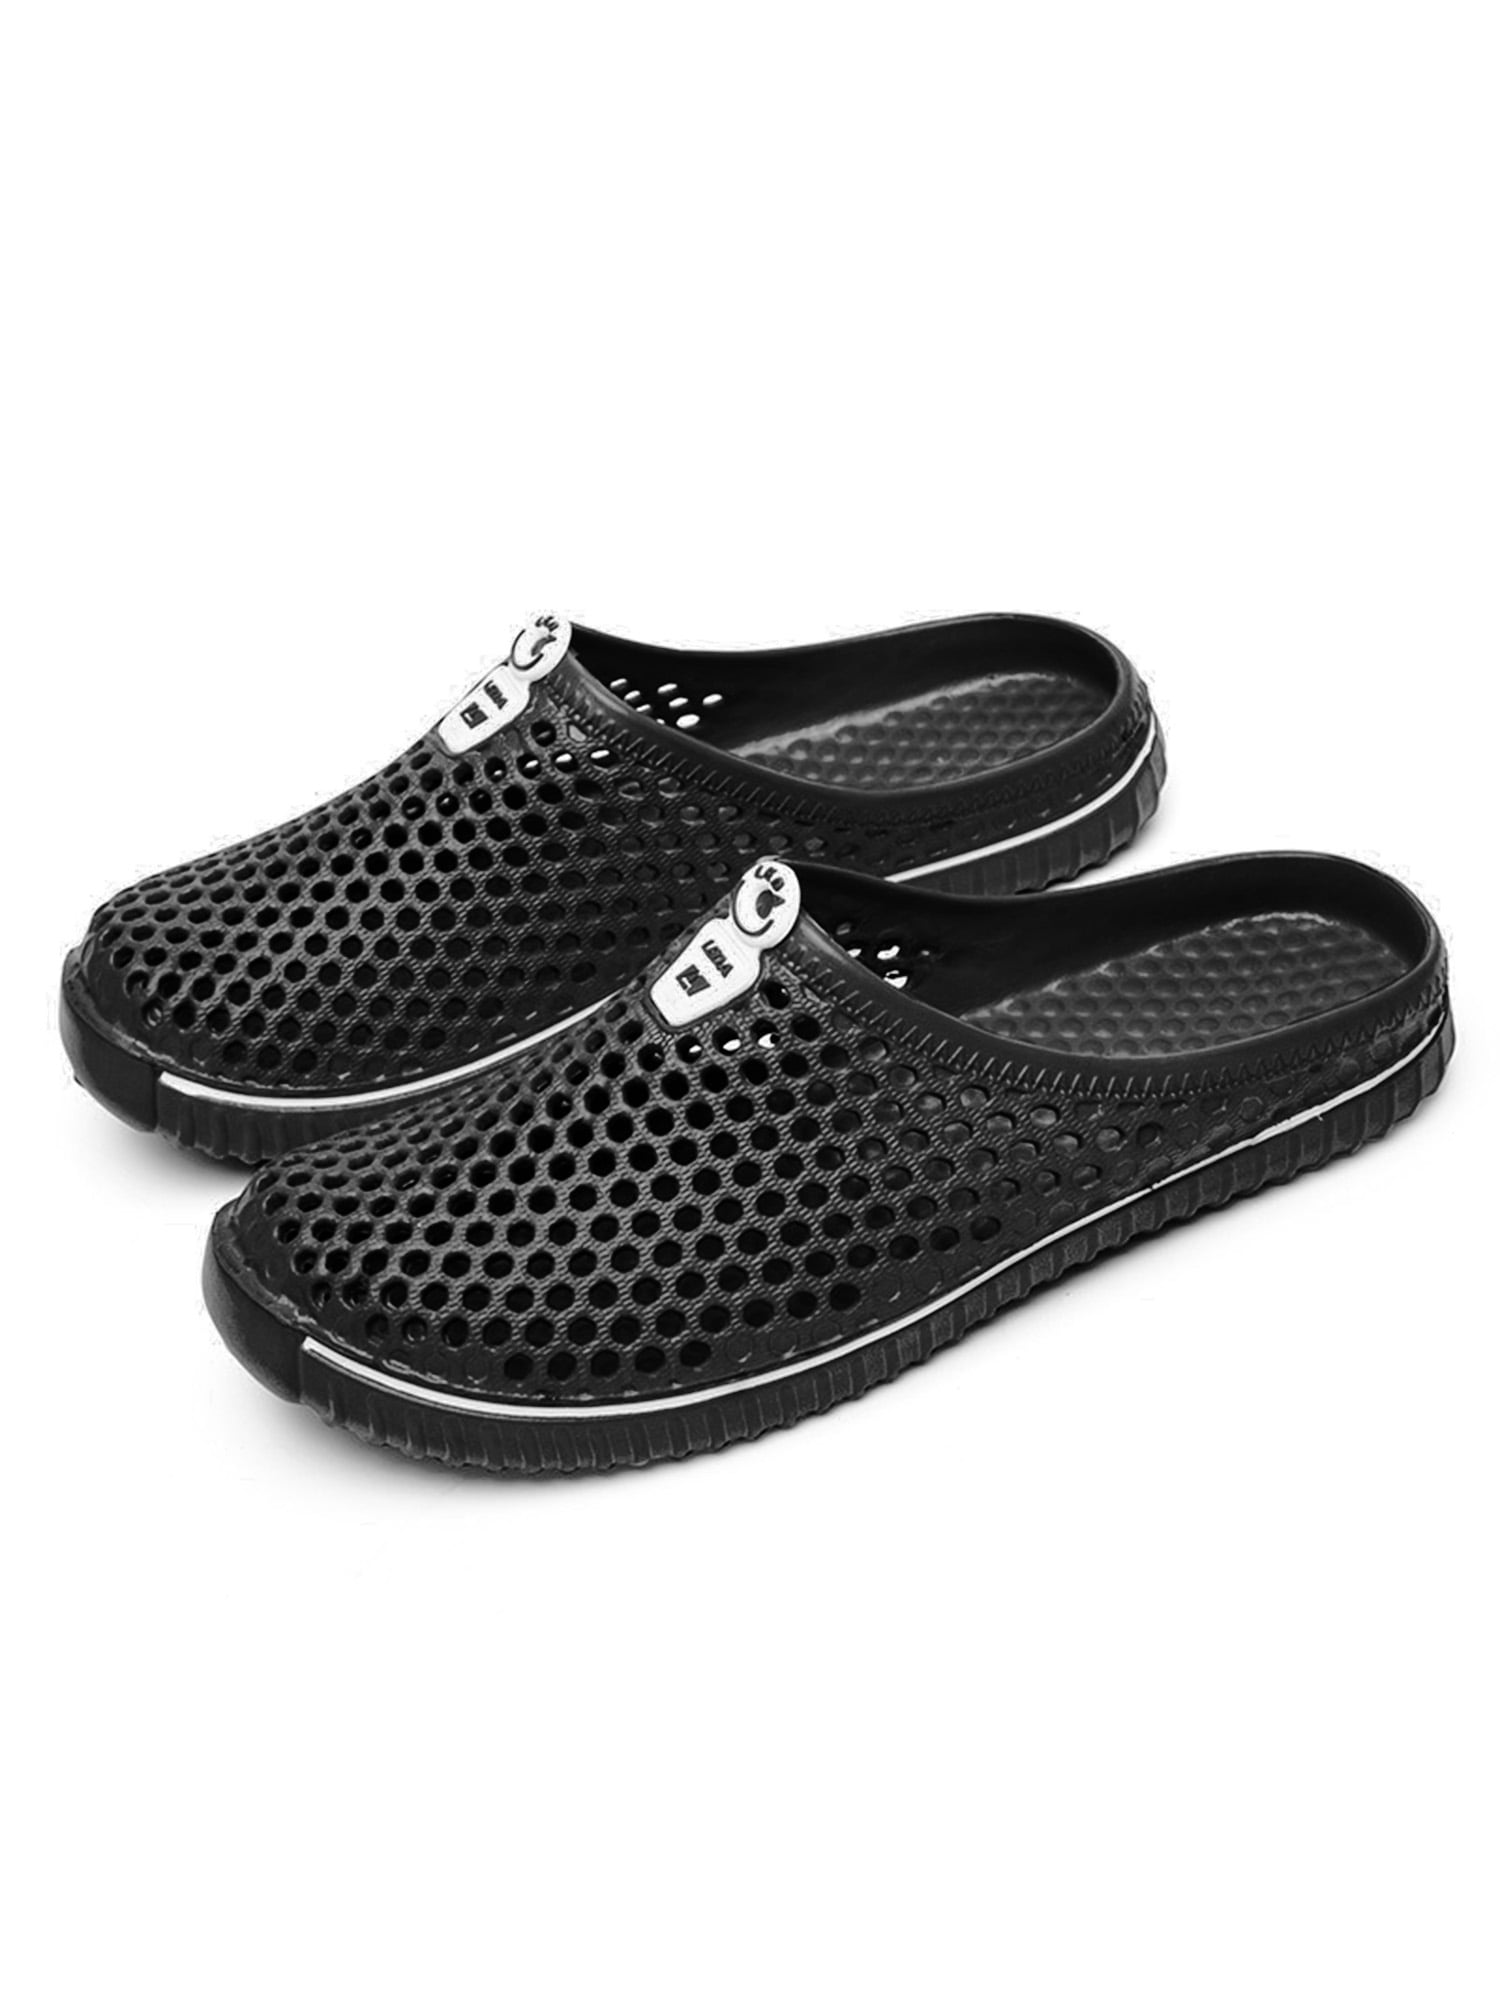 Men's Summer Hollow Out  Clogs Shoes Holiday Mules Beach Sandals Slip On Loafers